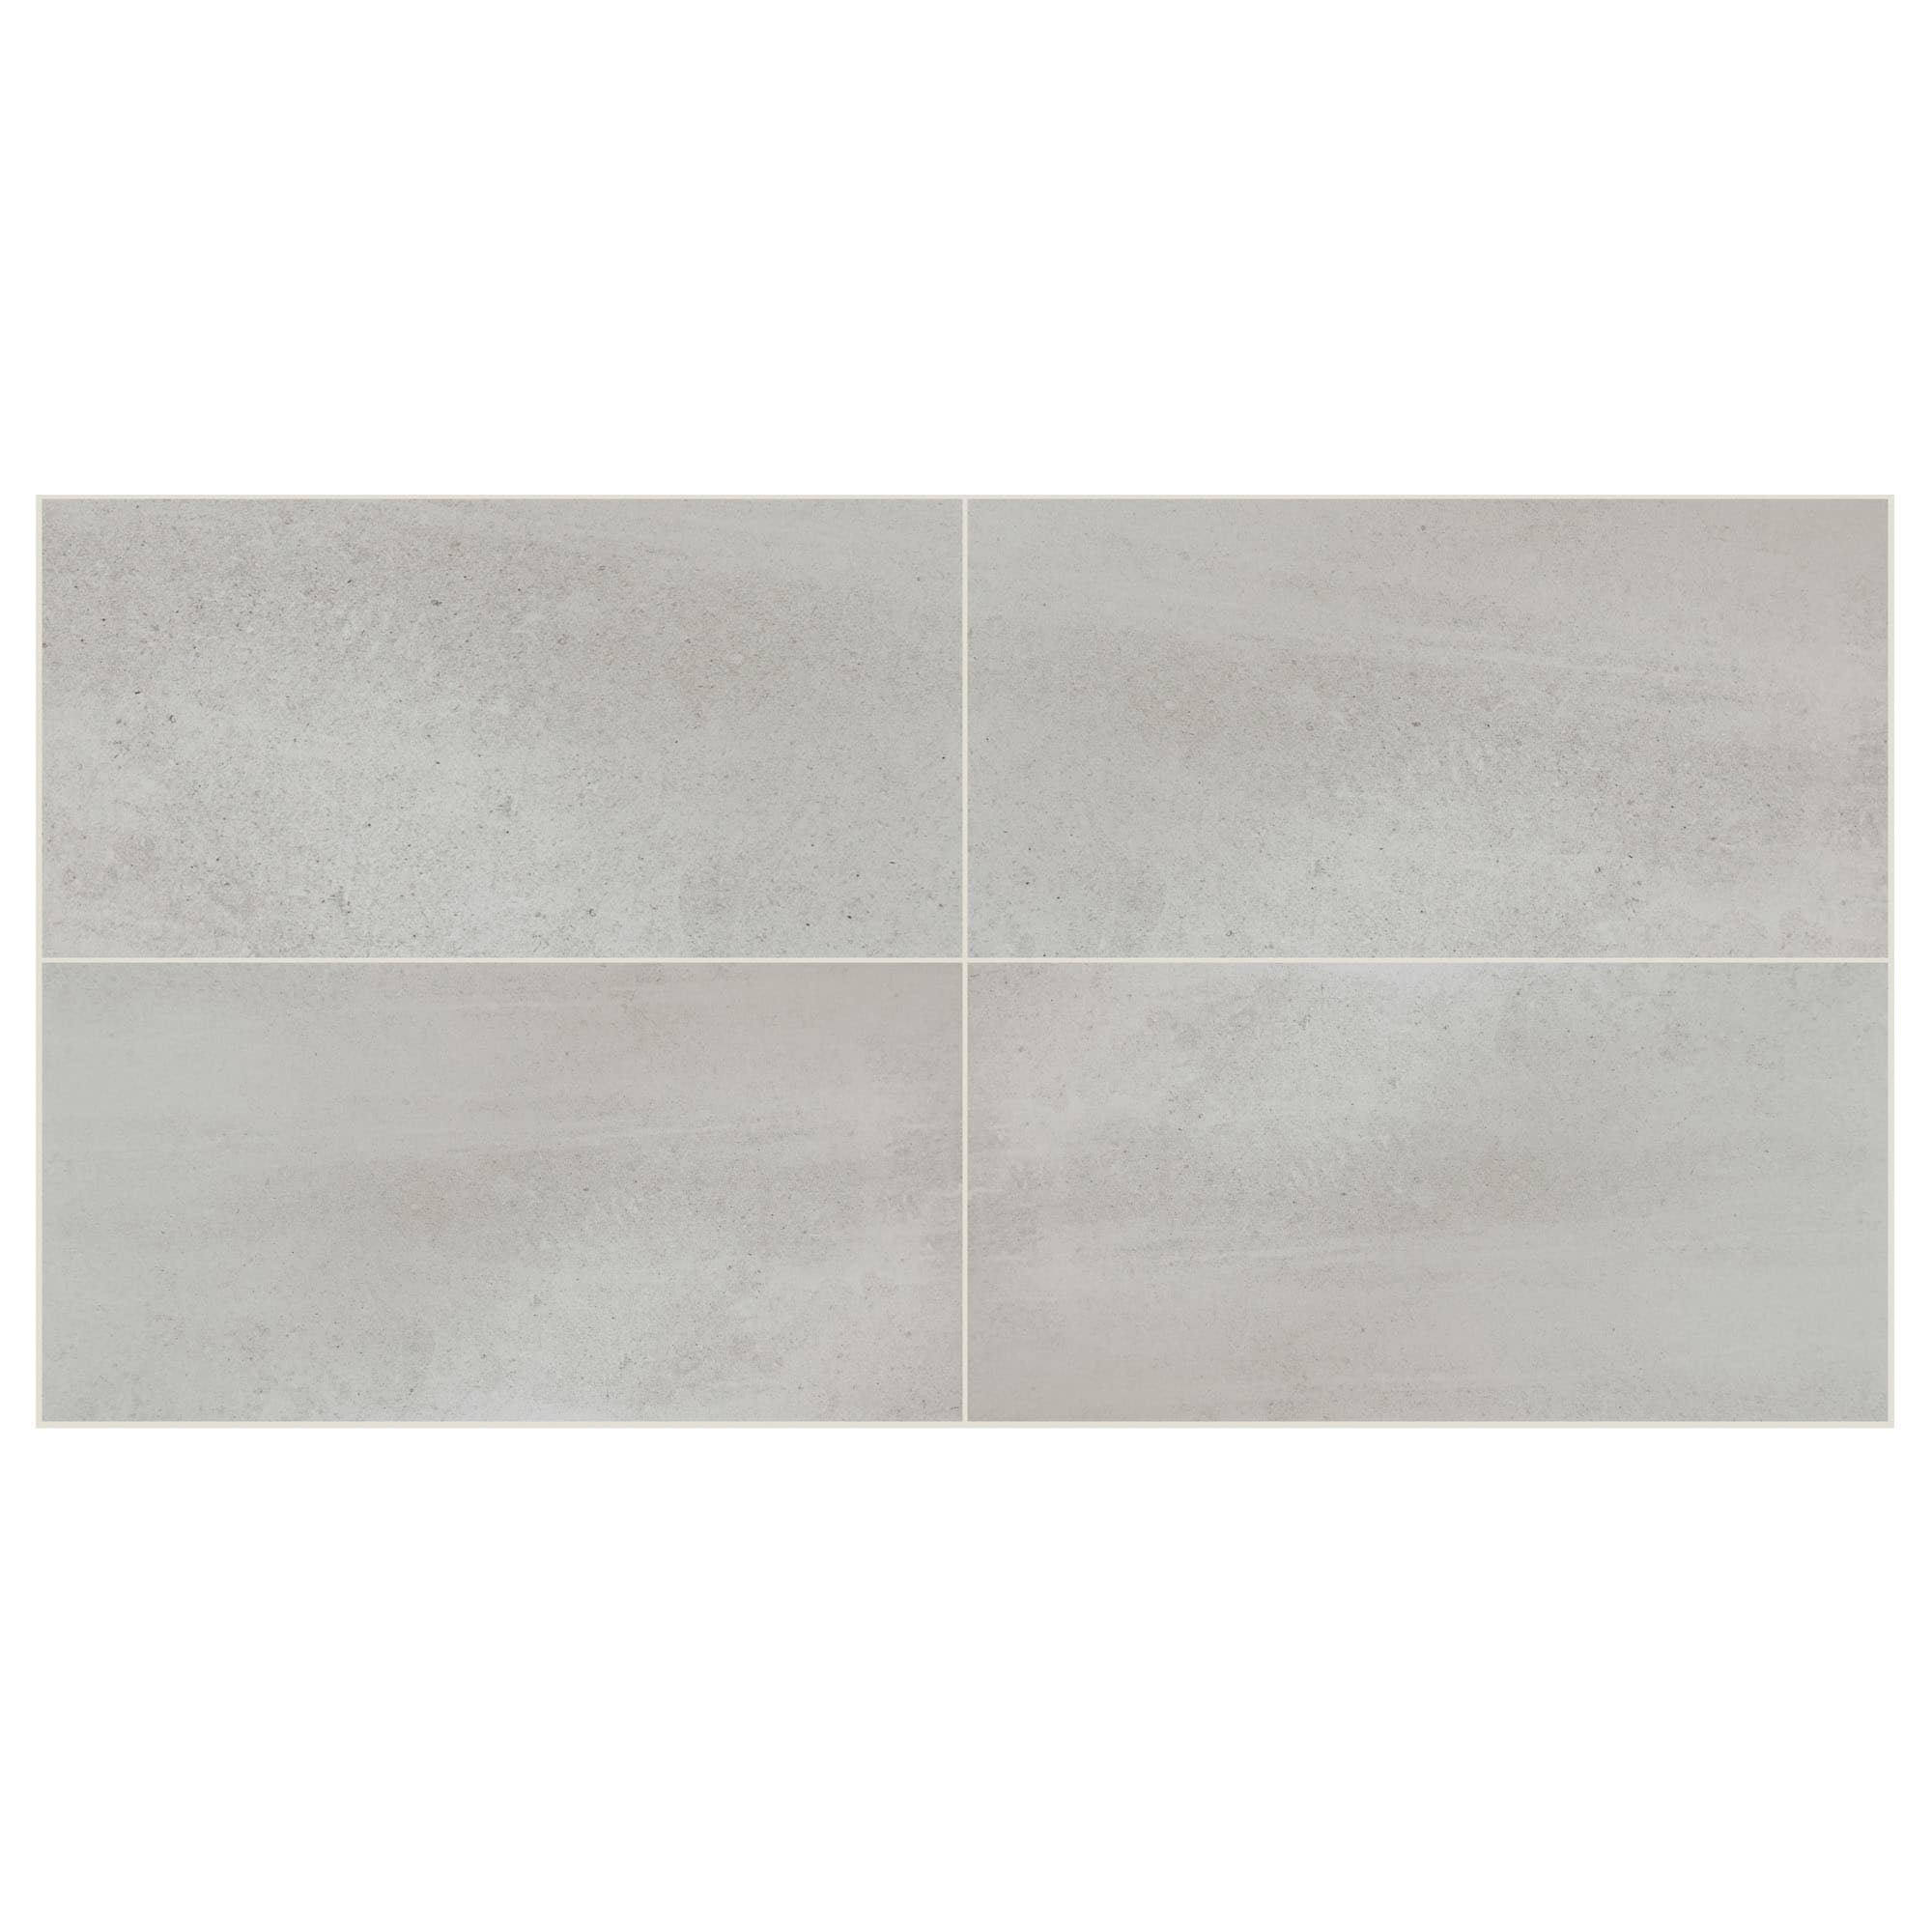 Gallery Cream Glazed 12-in x 24-in Glazed Porcelain Floor and Wall Tile (1.93-sq. ft/ Piece) | - GBI Tile & Stone Inc. 1694010